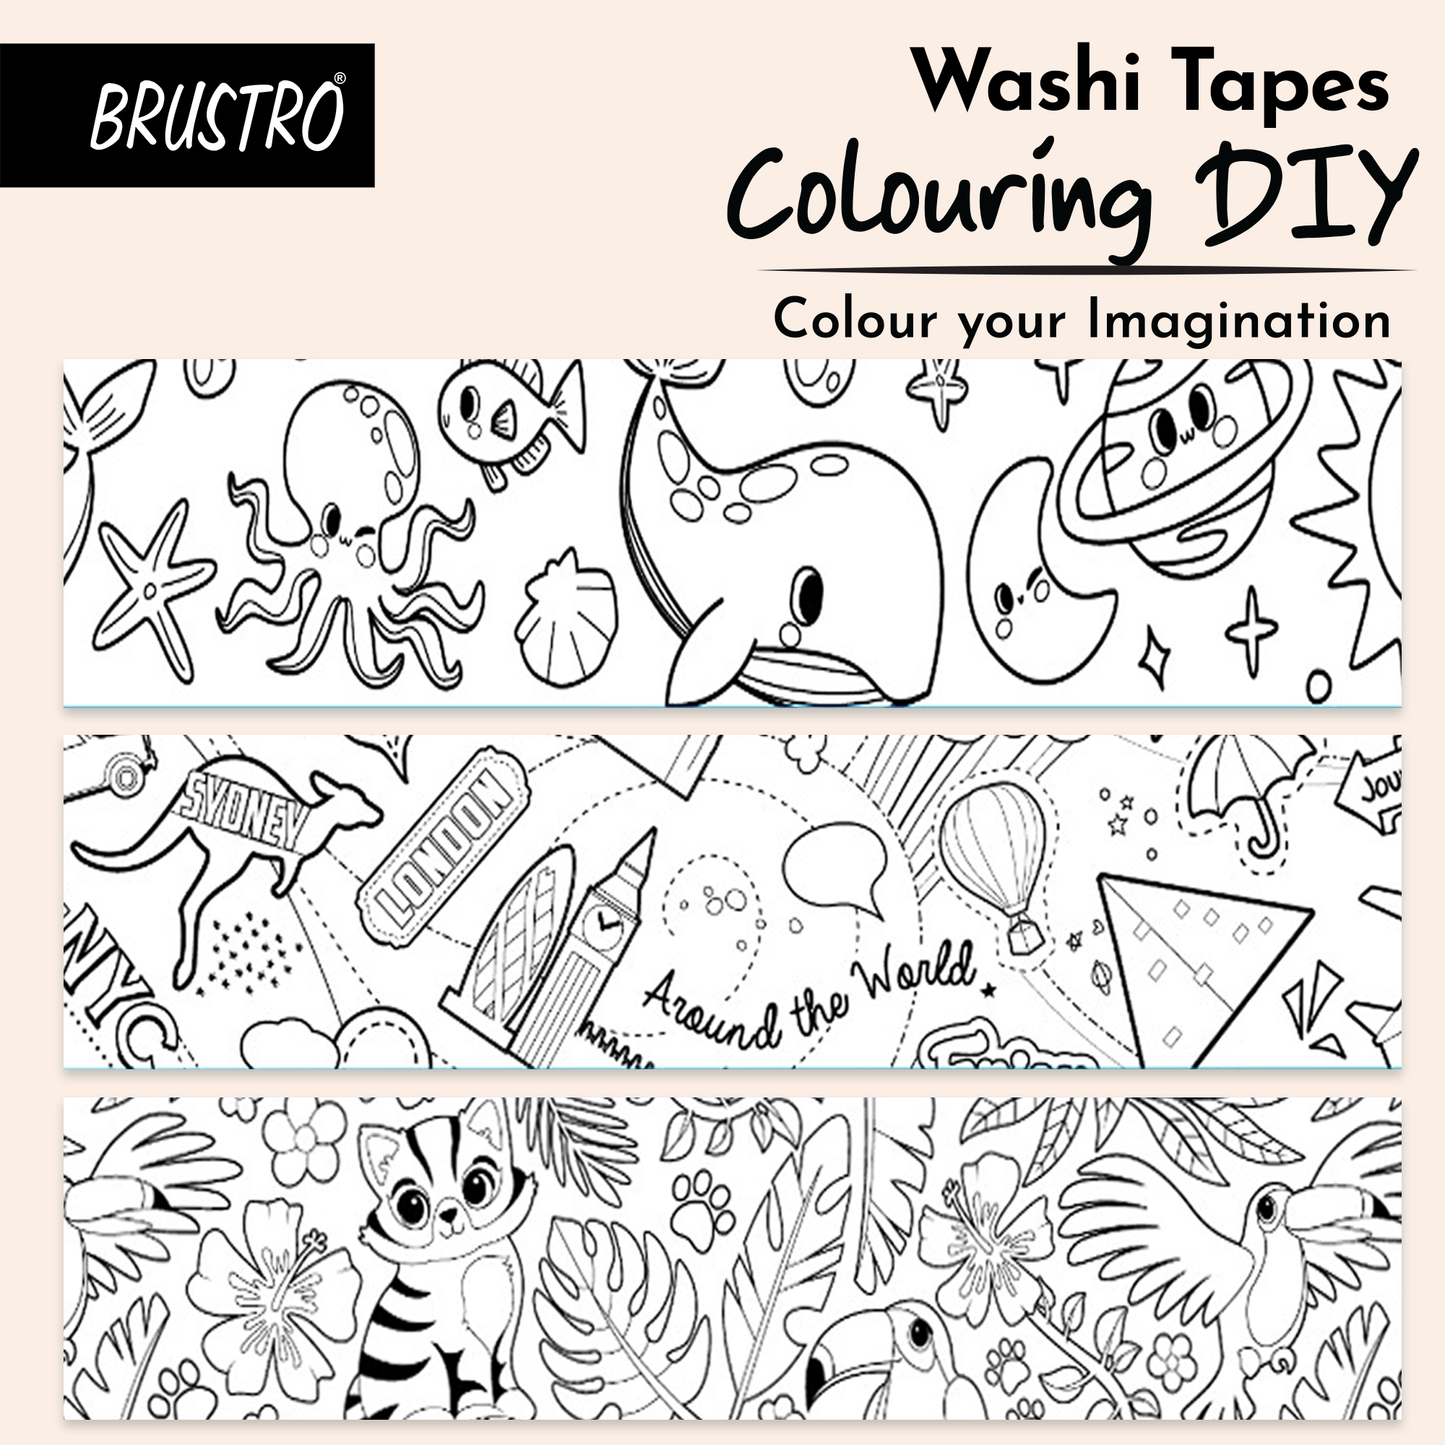 BRUSTRO Washi Tapes DIY Colouring tapes, 50 mm x 5 mtrs (set of 3)